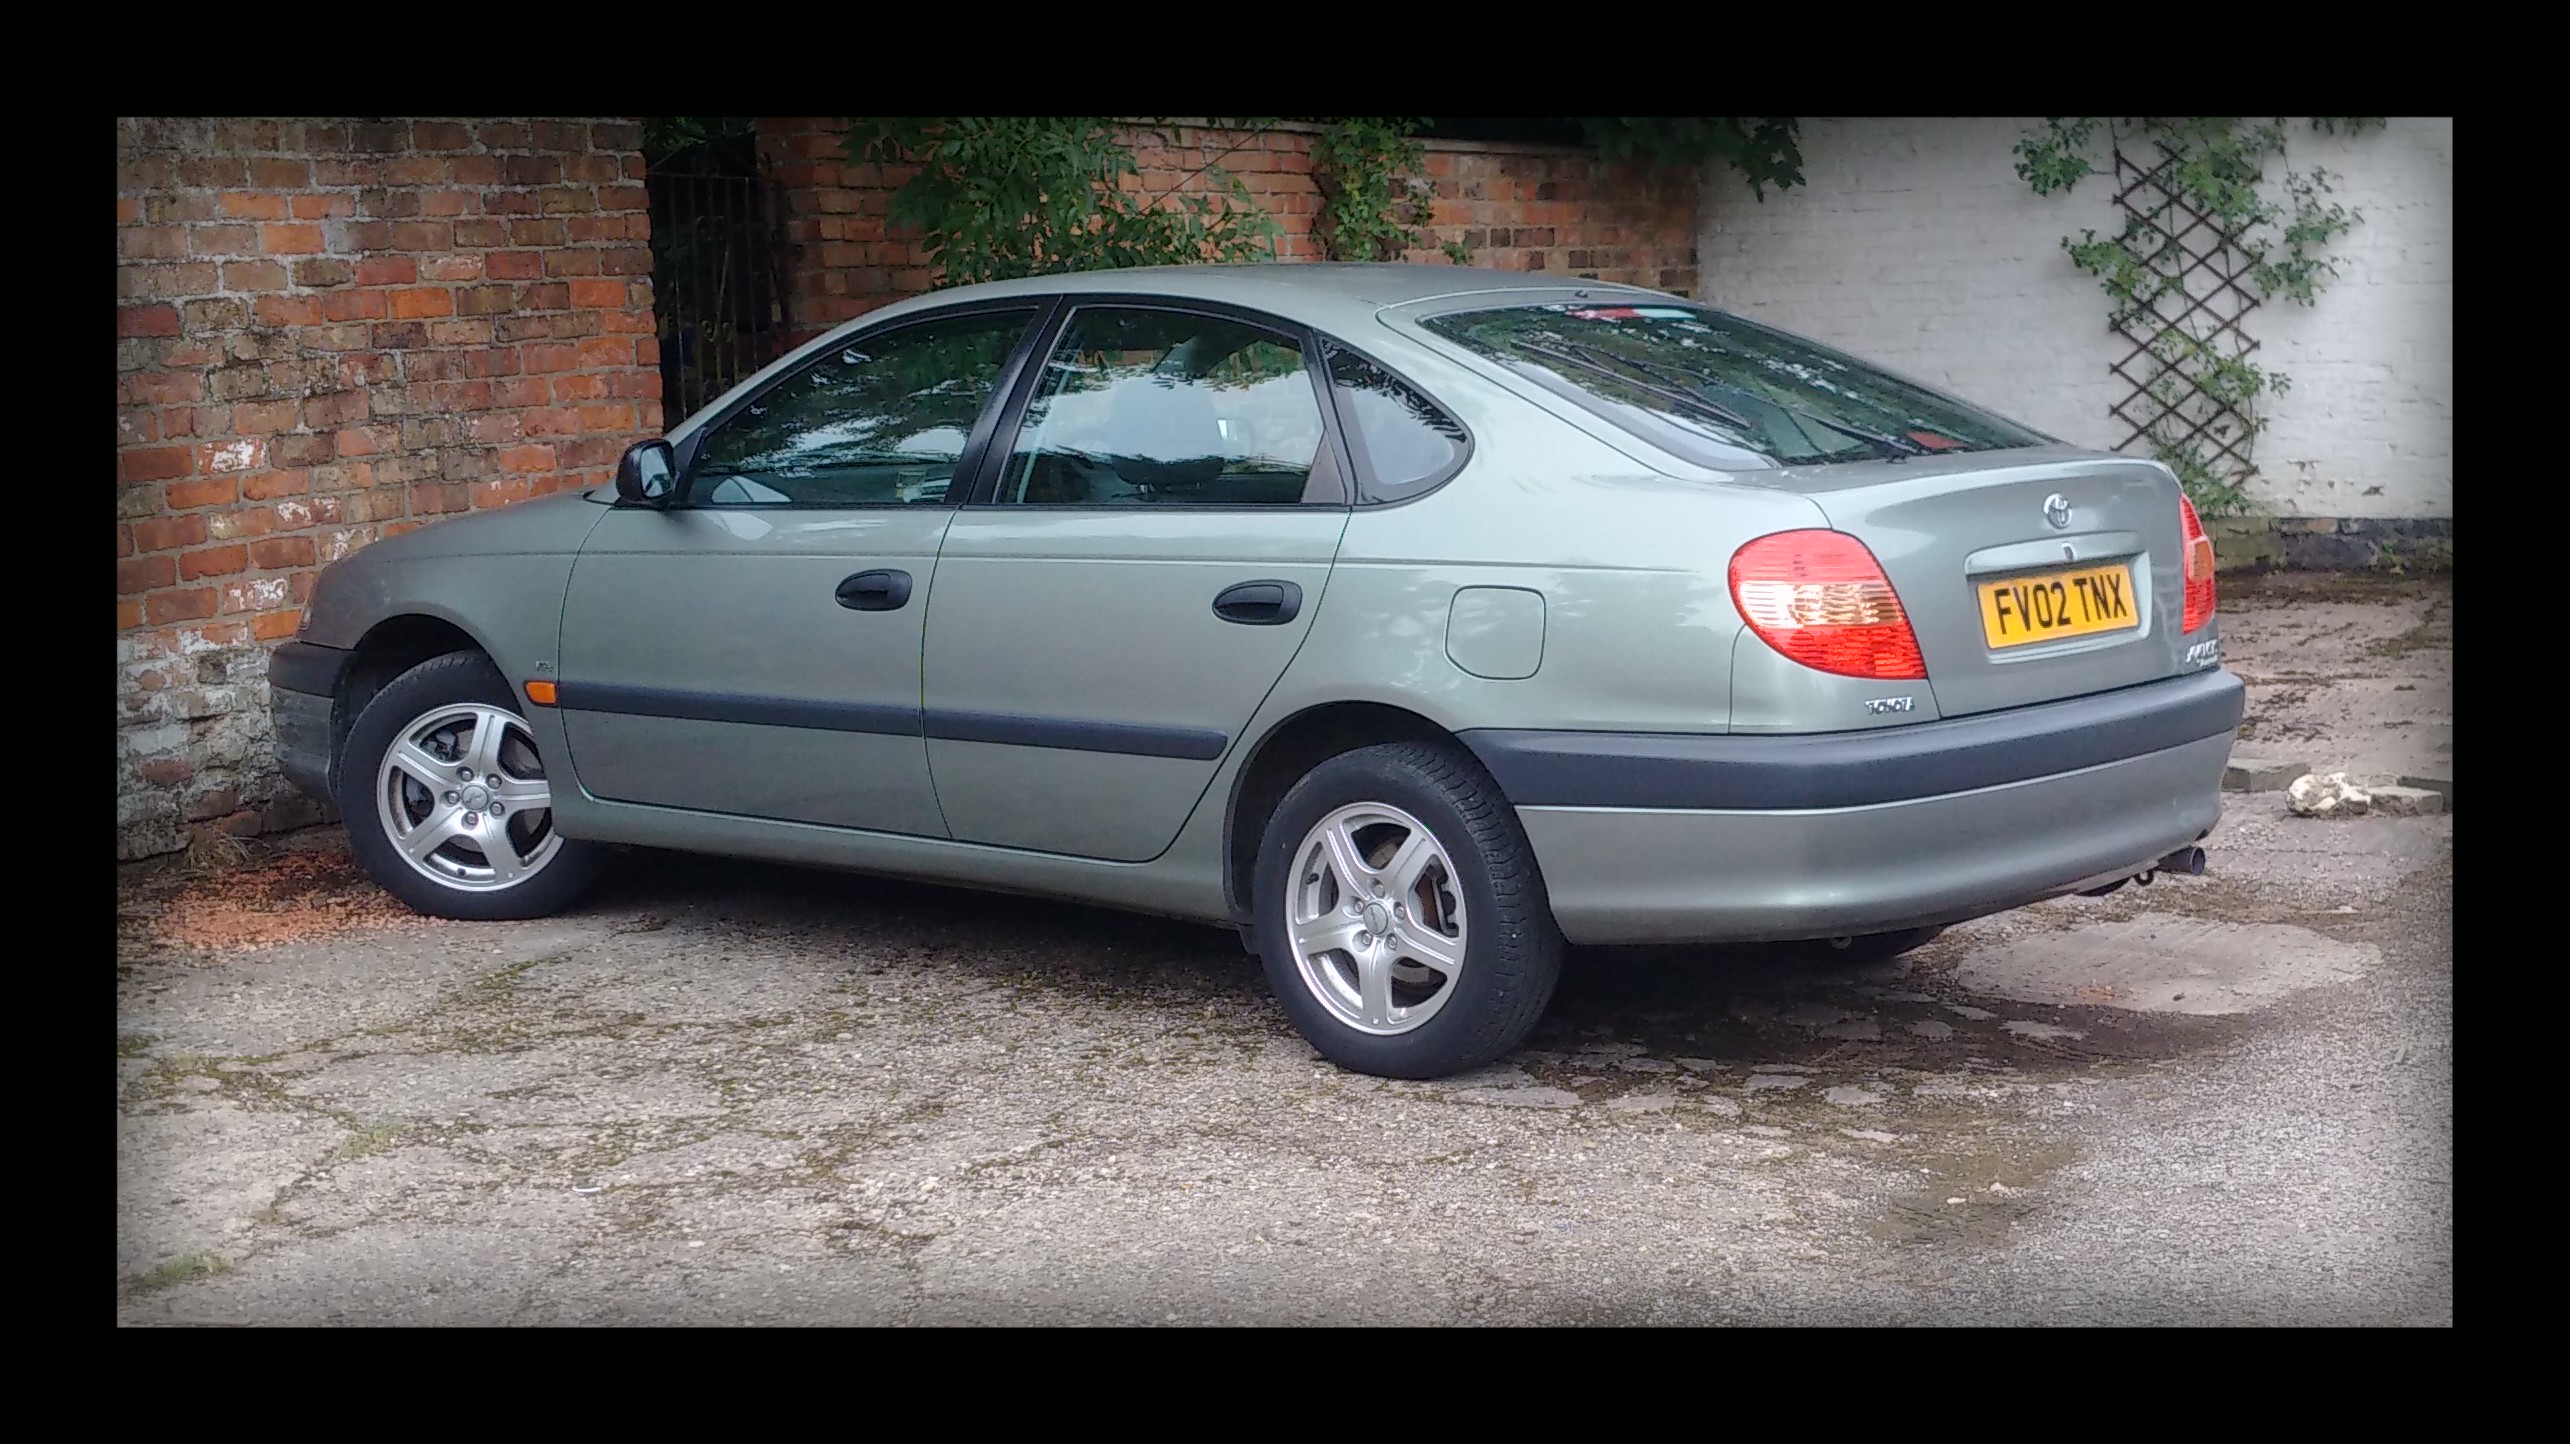 Toyota Avensis 2.0 vvti T Spirit - My first shed - Page 4 - Readers' Cars - PistonHeads